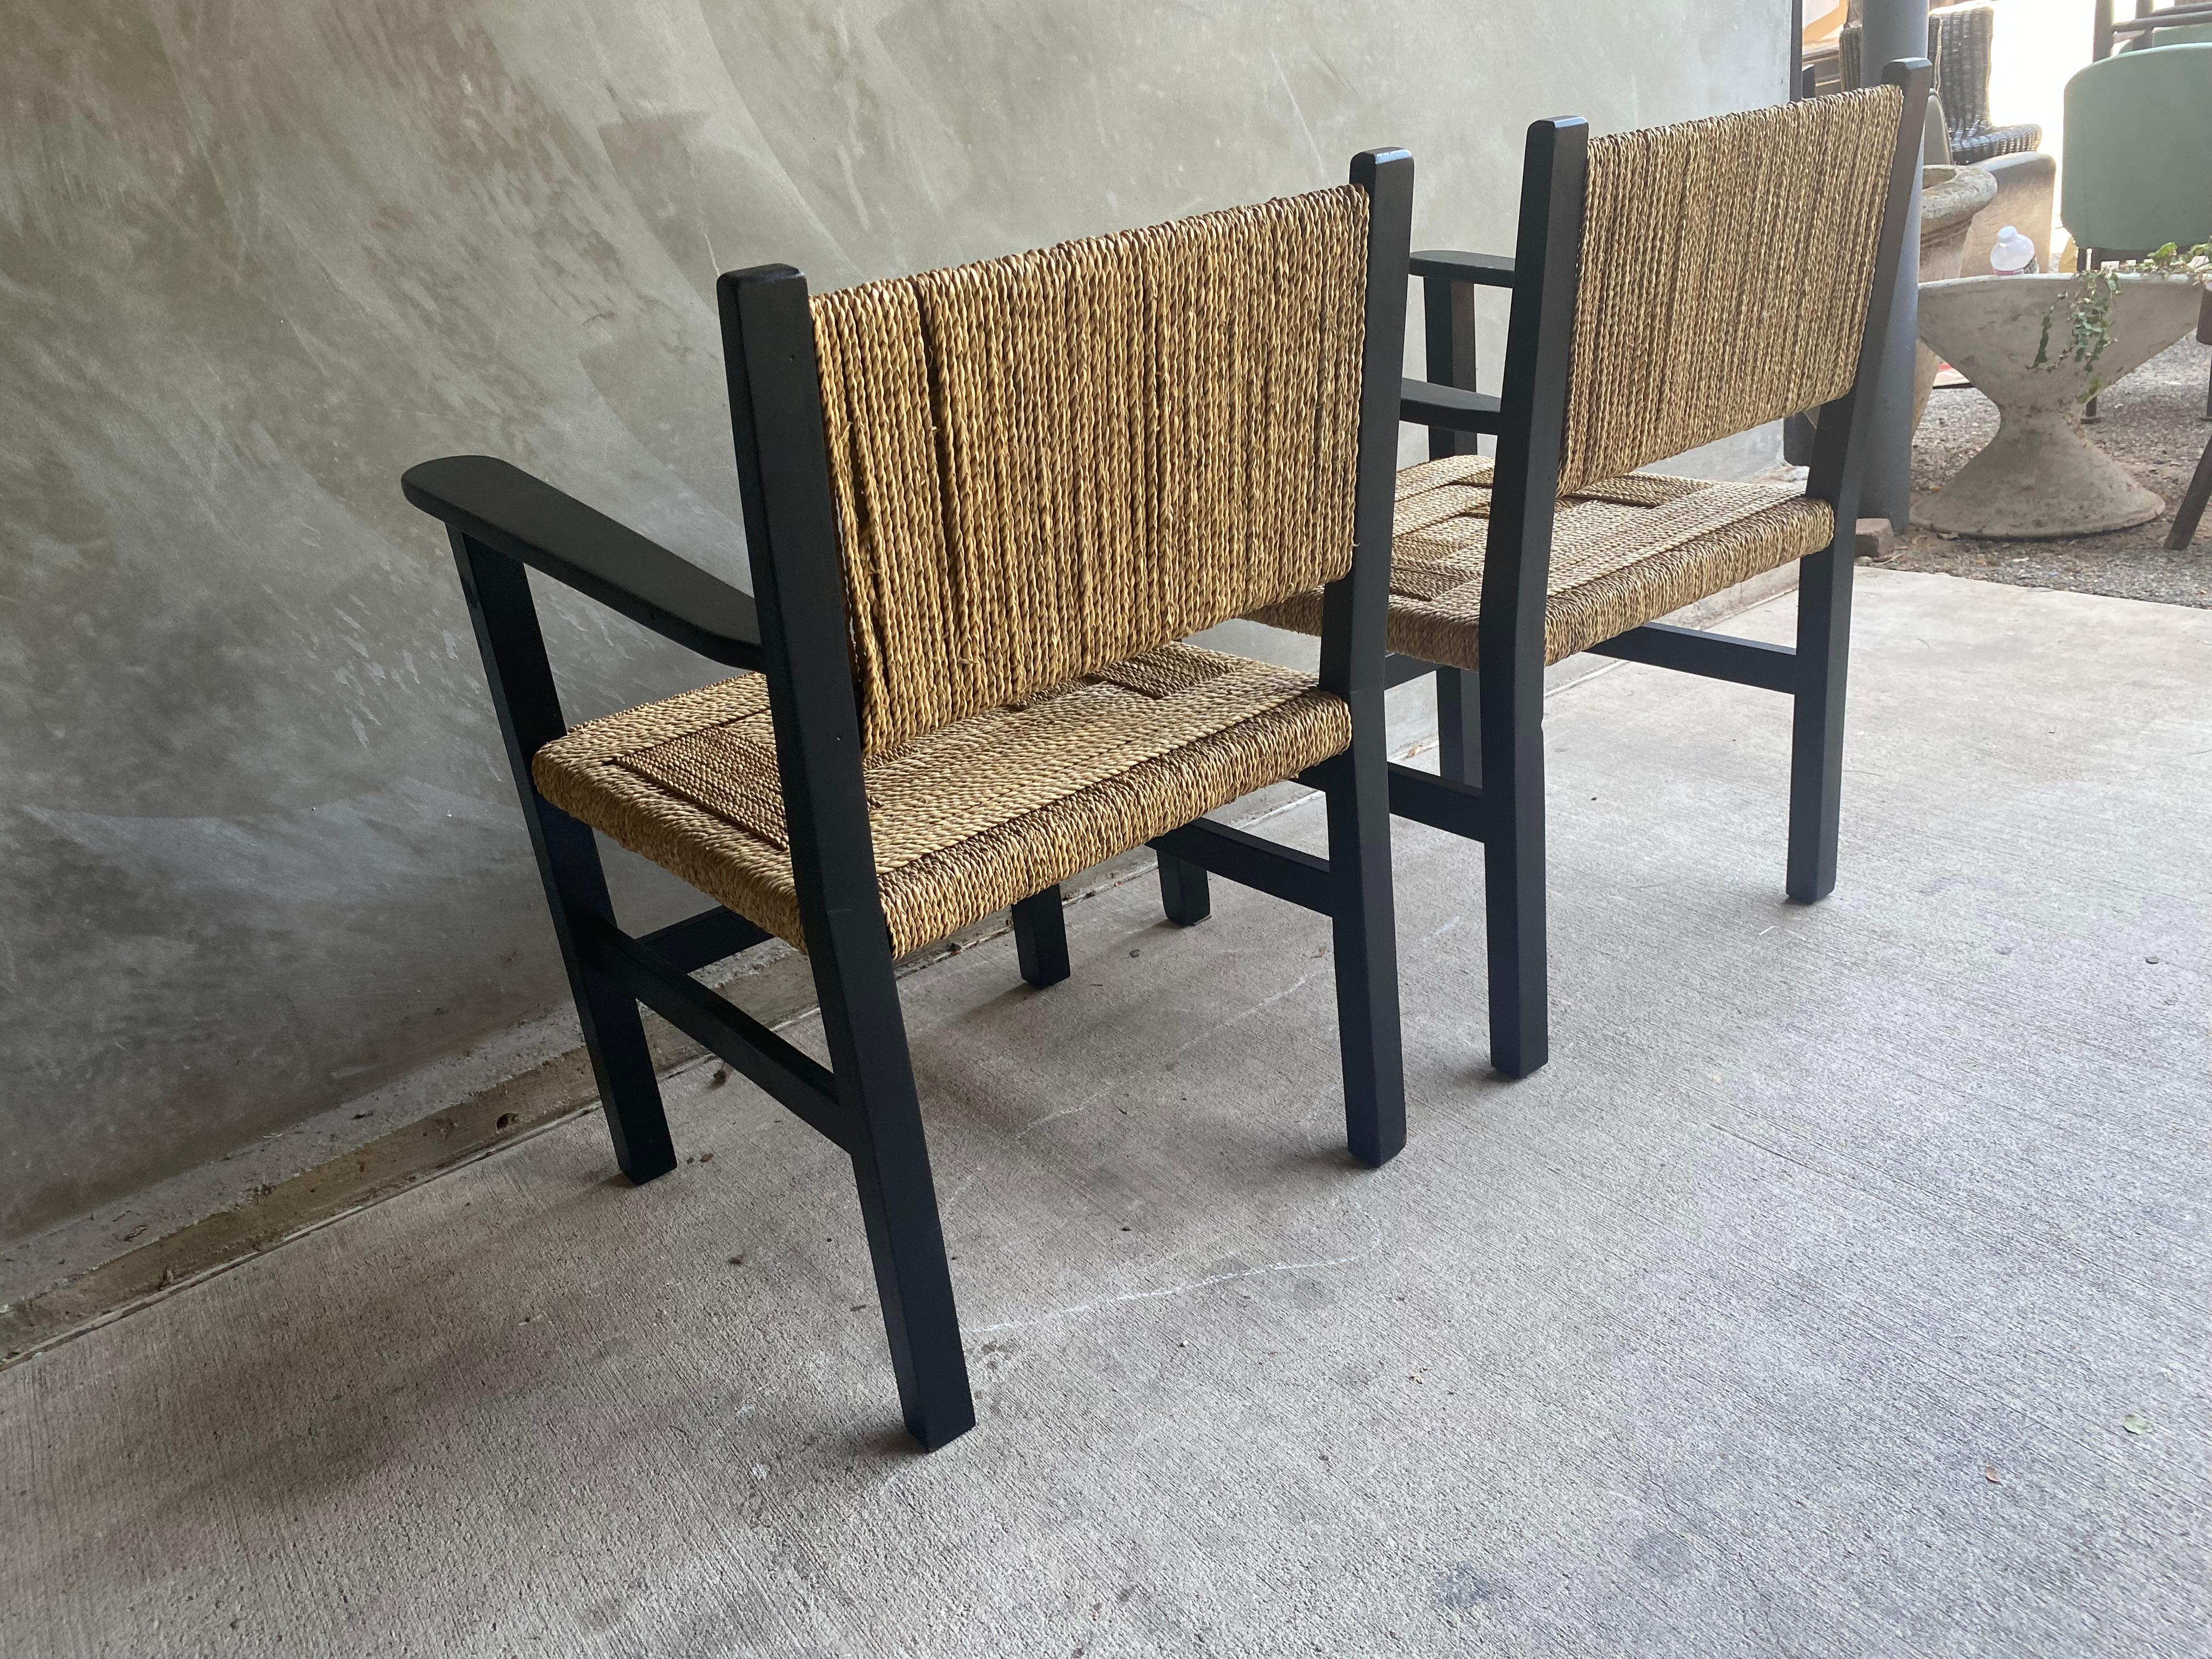 Pair of Black Lacquered and Woven Rope Armchairs, France, 1950's For Sale 5